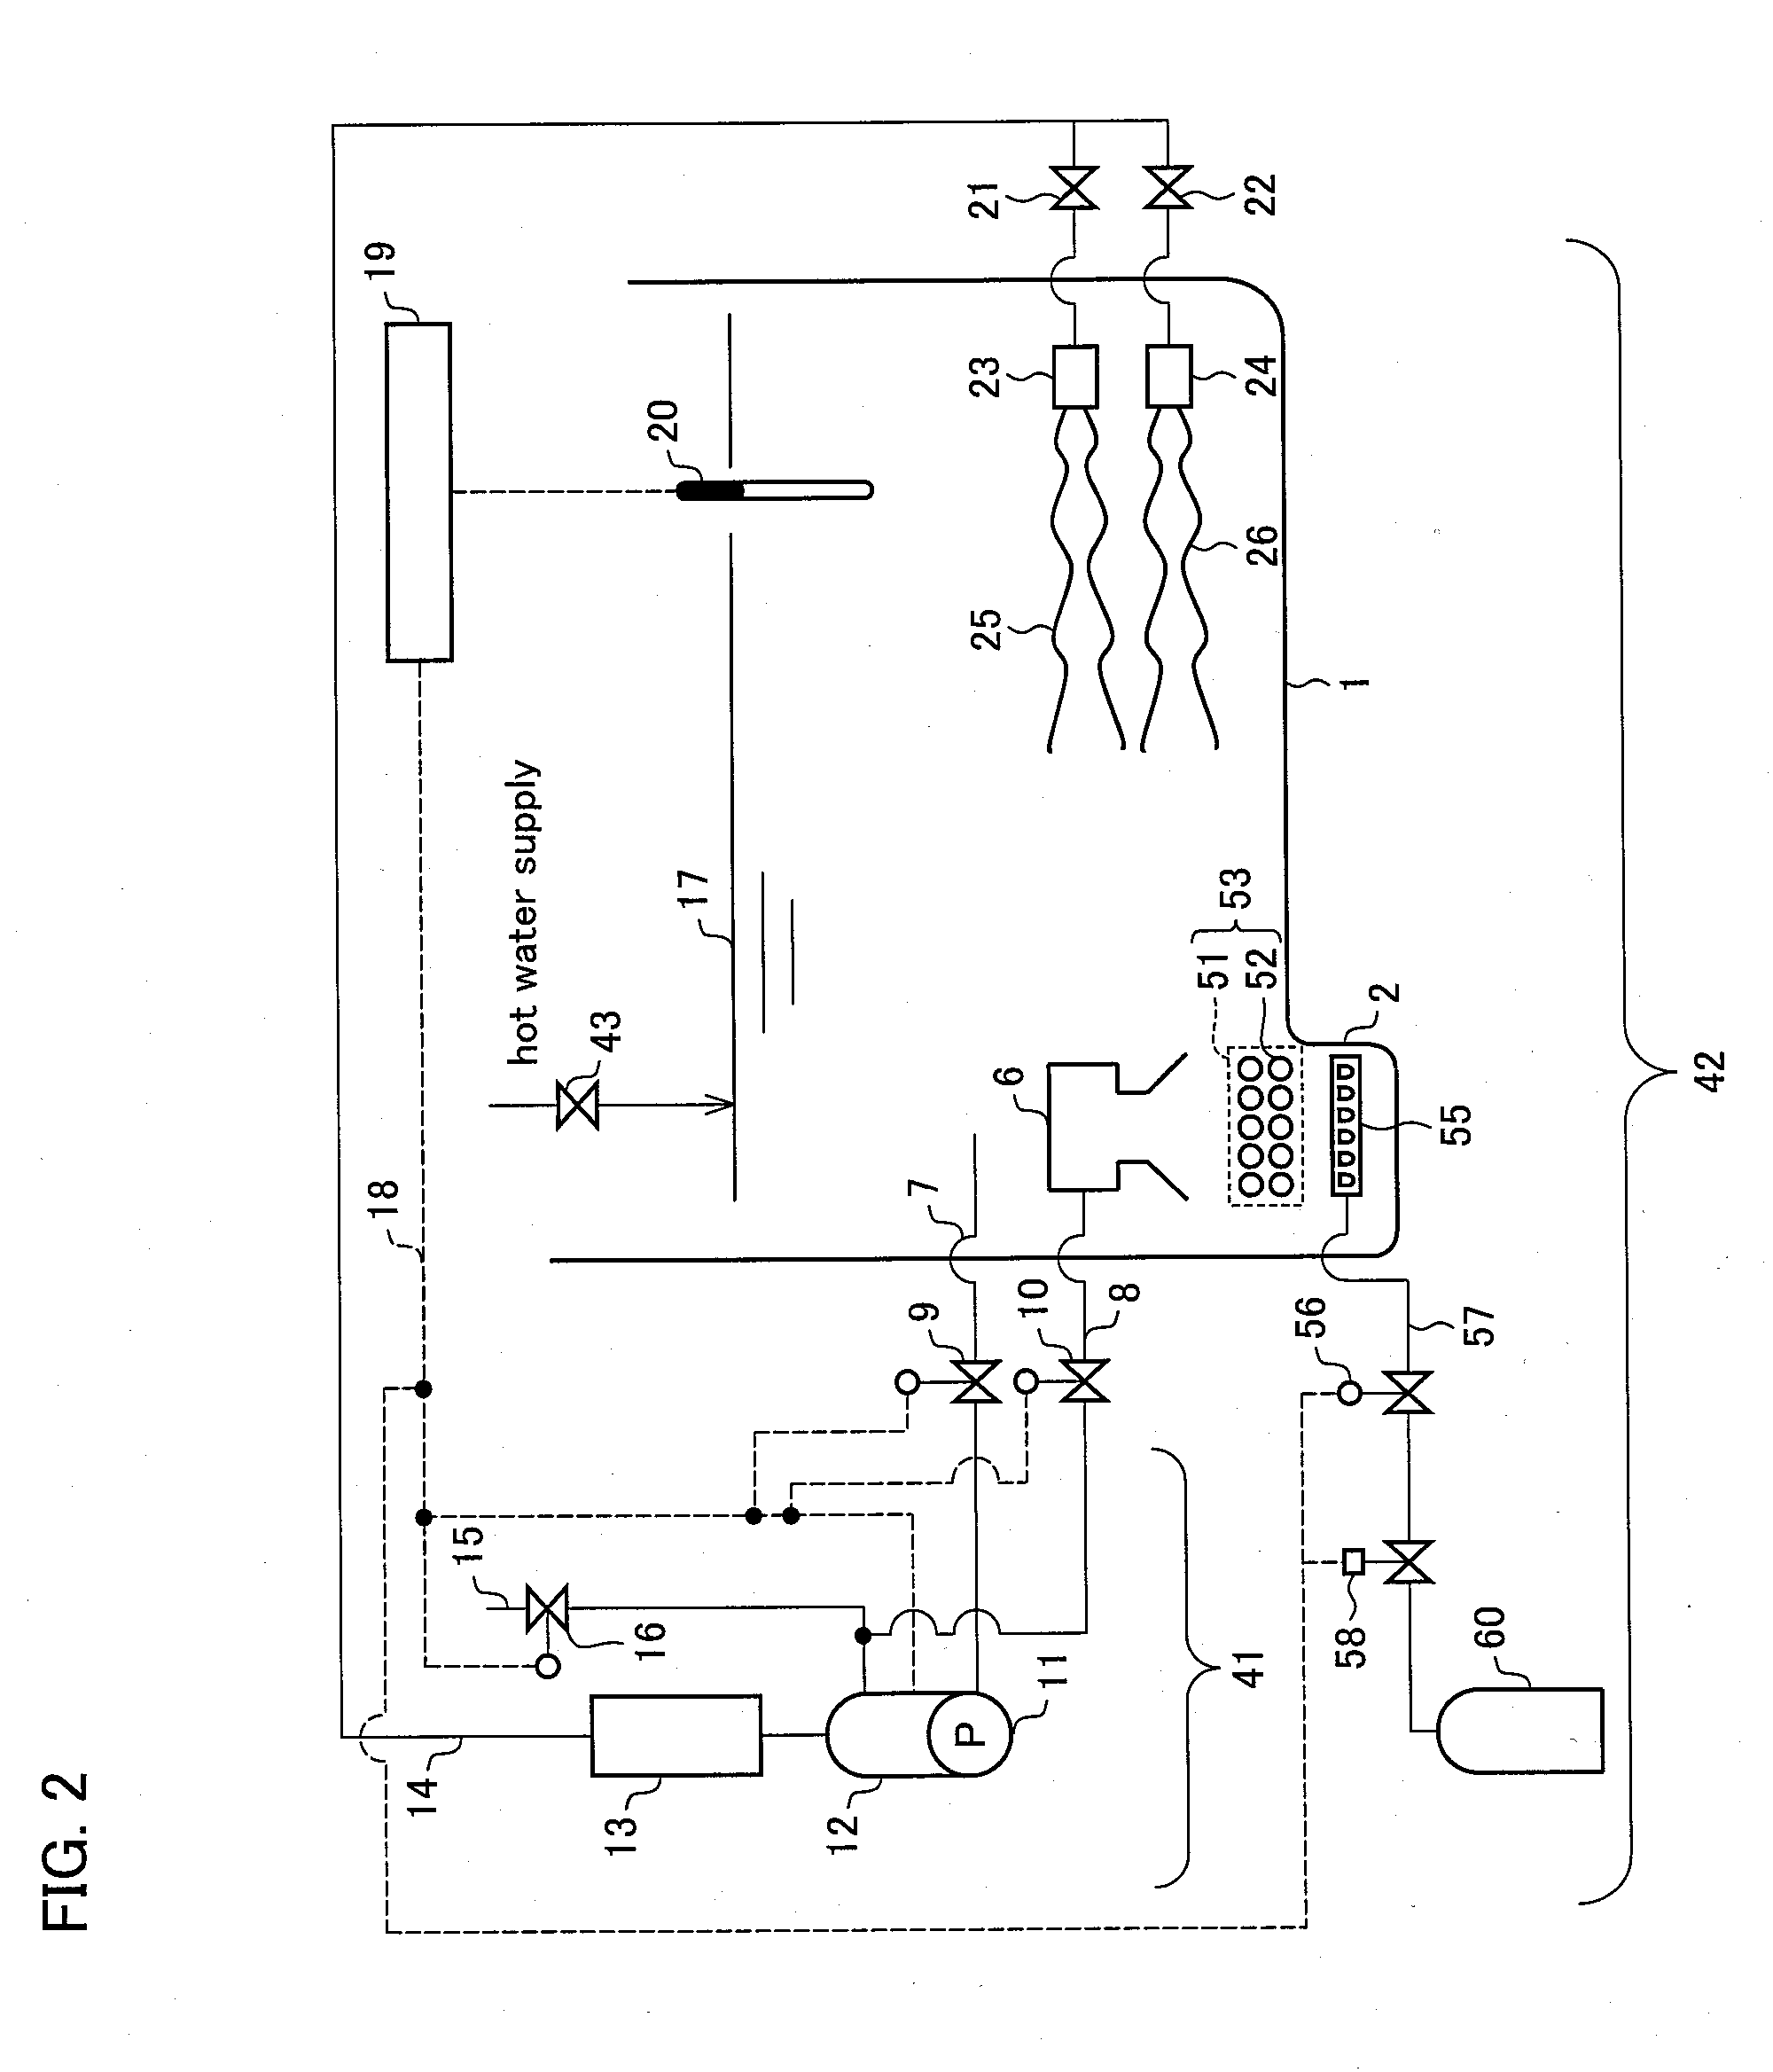 Device and method for increasing blood flow and insulin-like growth factor